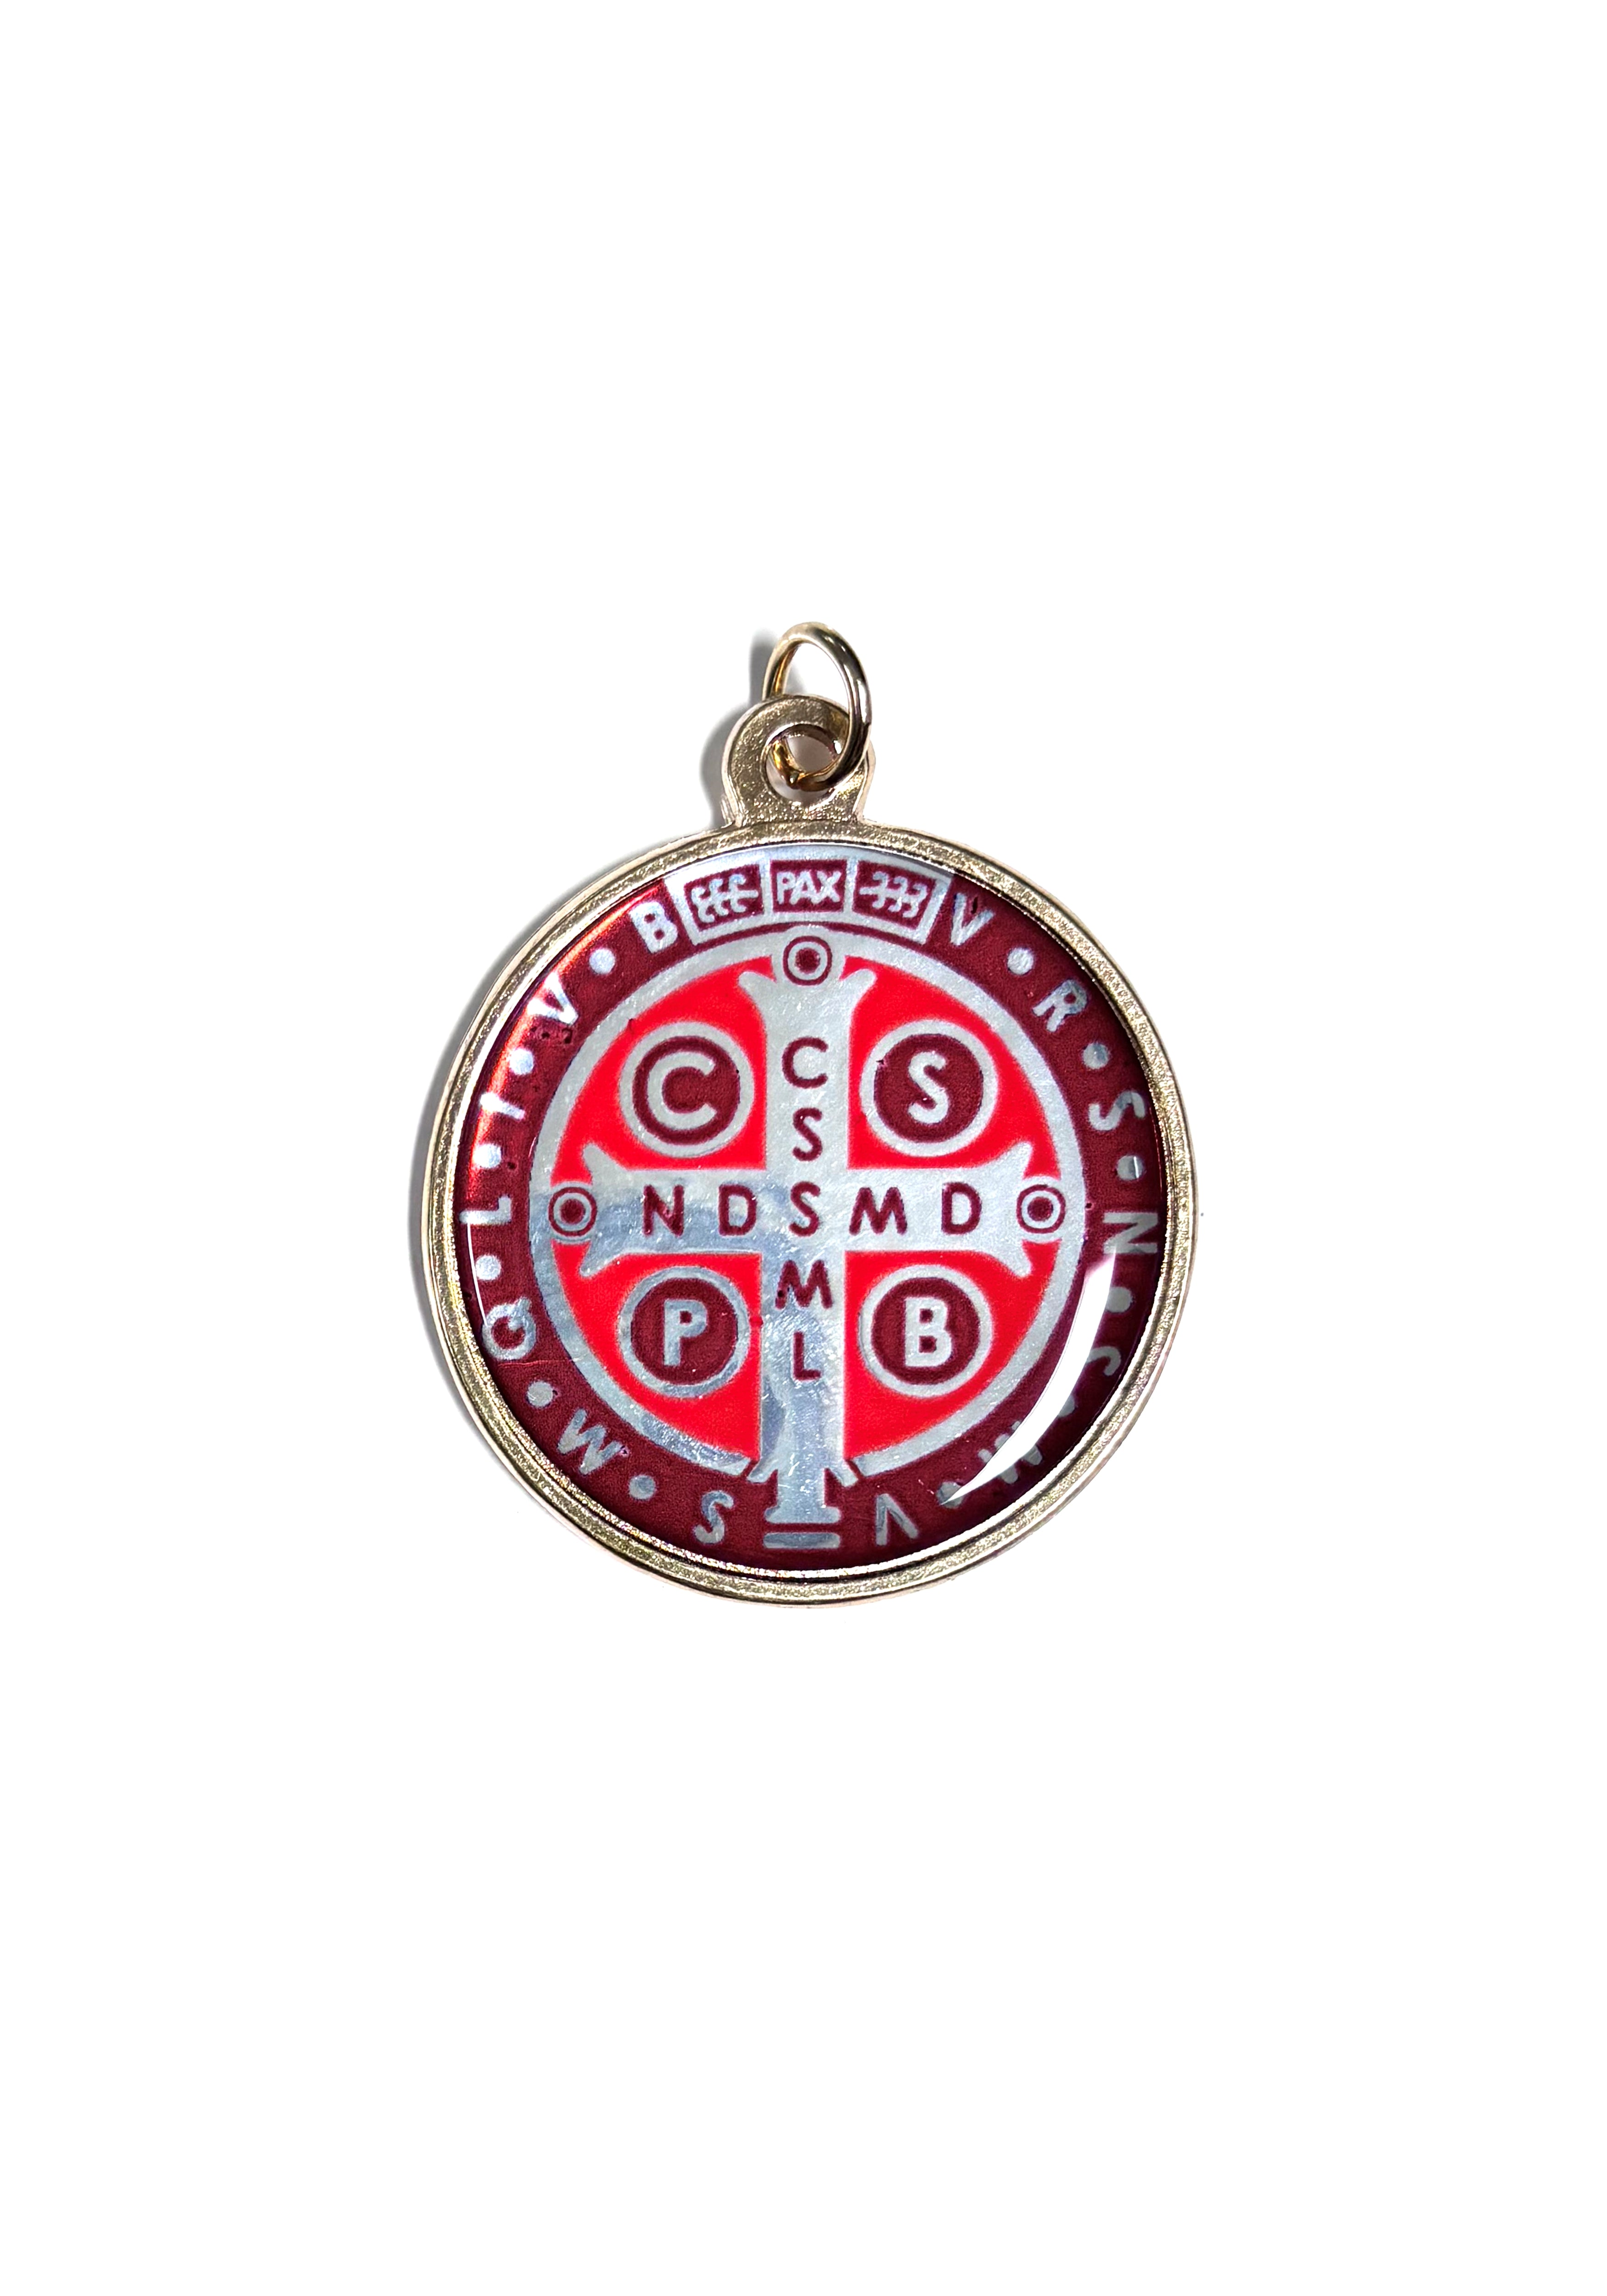 2 Inch Saint Benedict red and gold medal